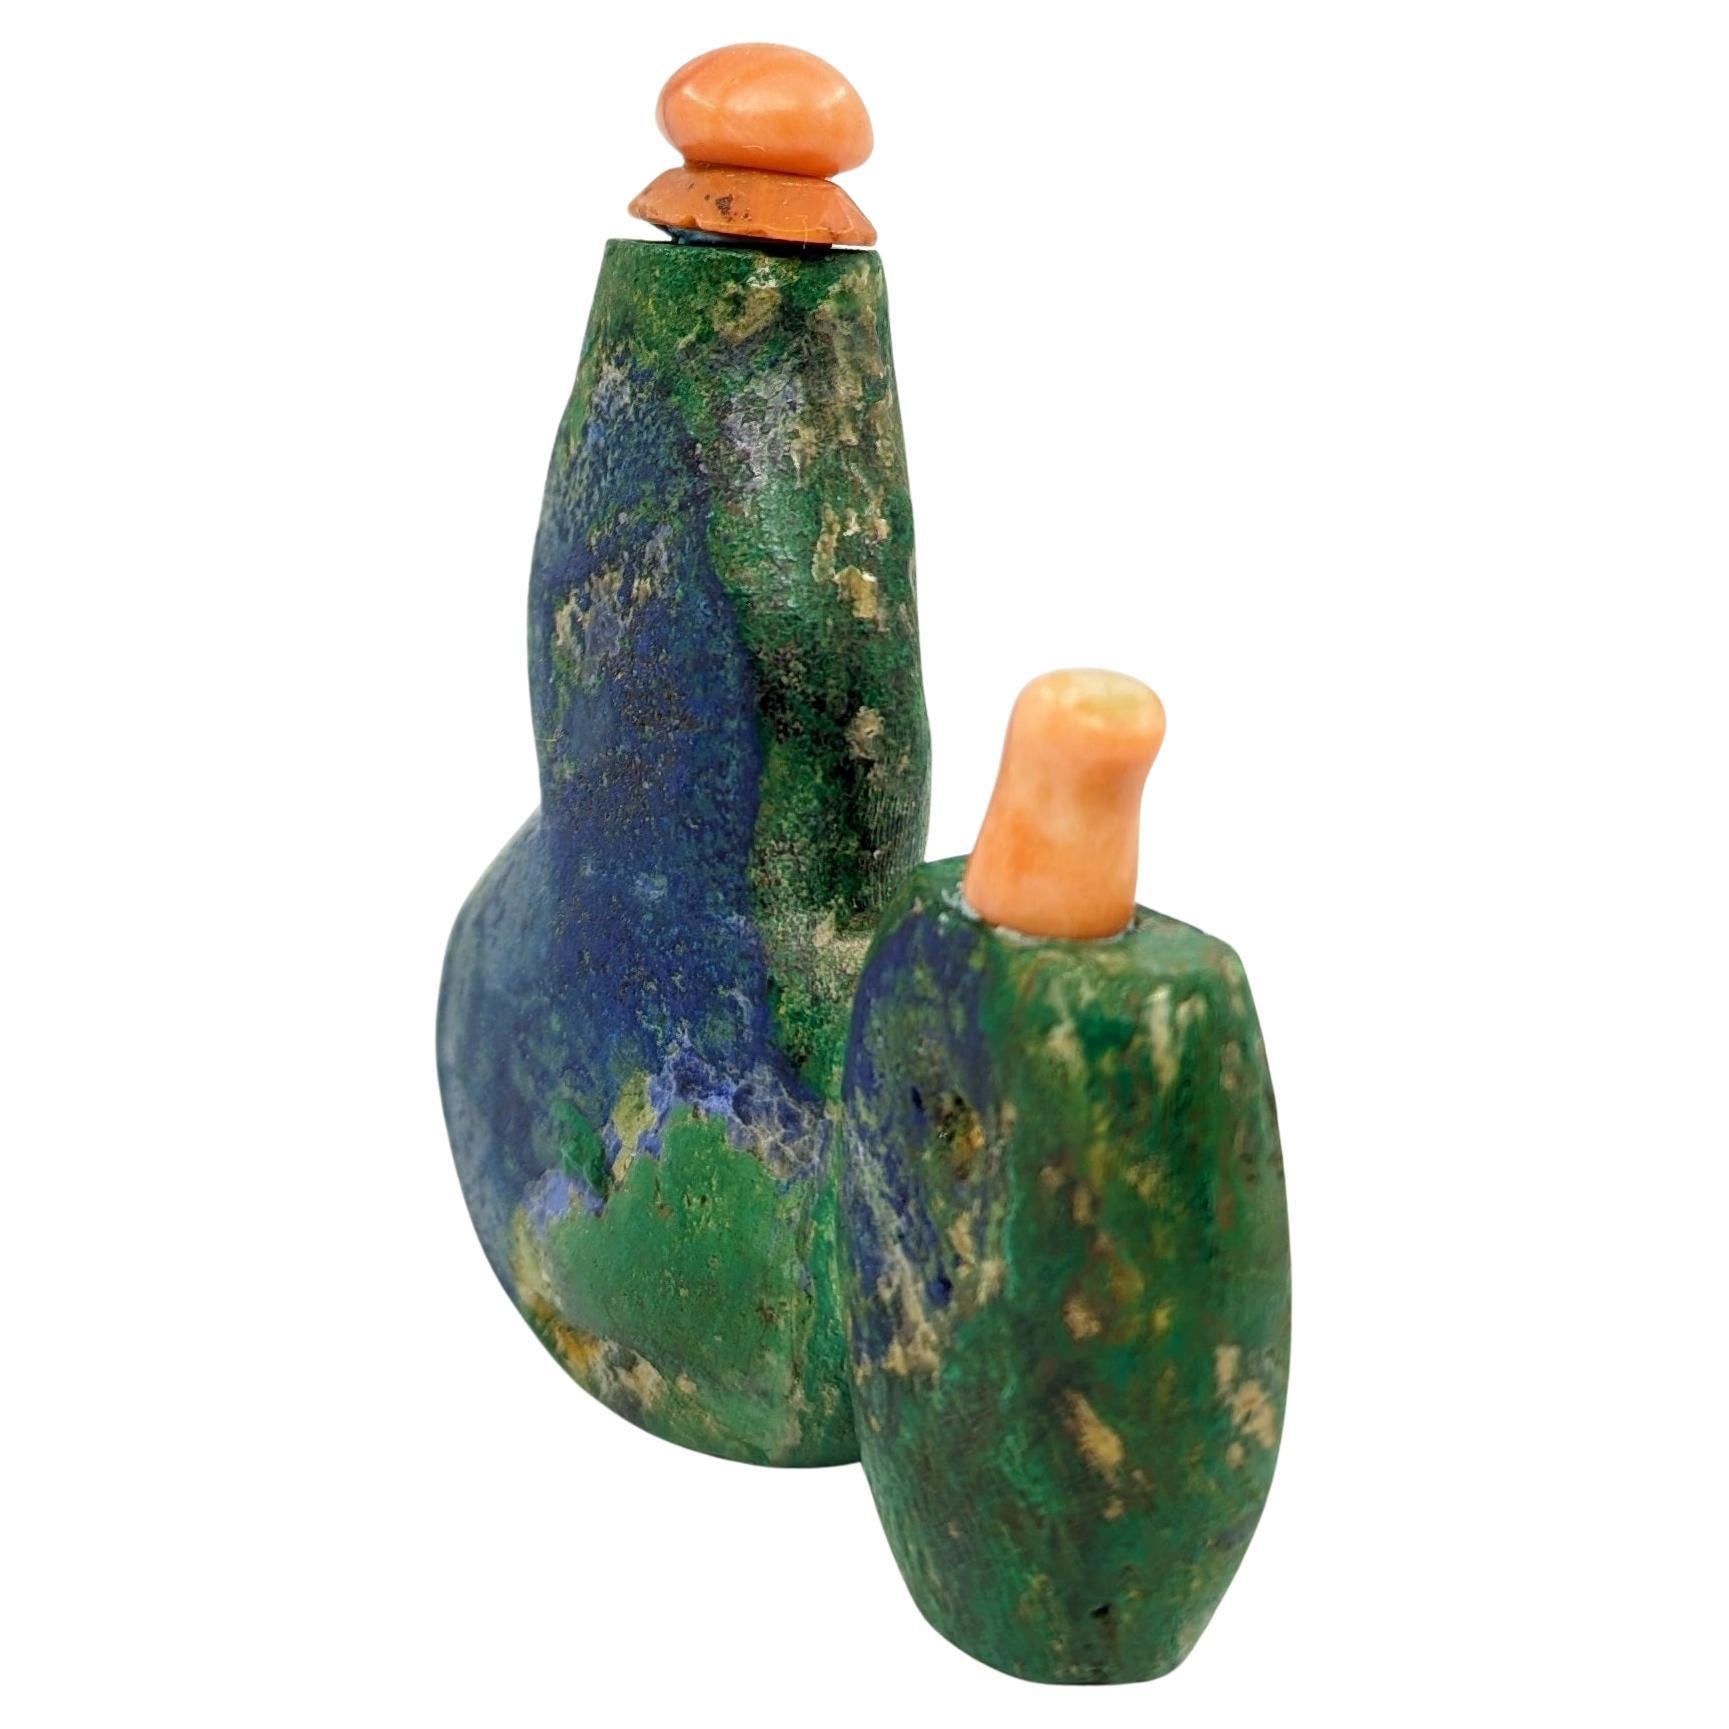 Rare Antique Chinese Azurite Malachite Double Snuff Bottle 19c Qing Dynasty In Good Condition For Sale In Richmond, CA